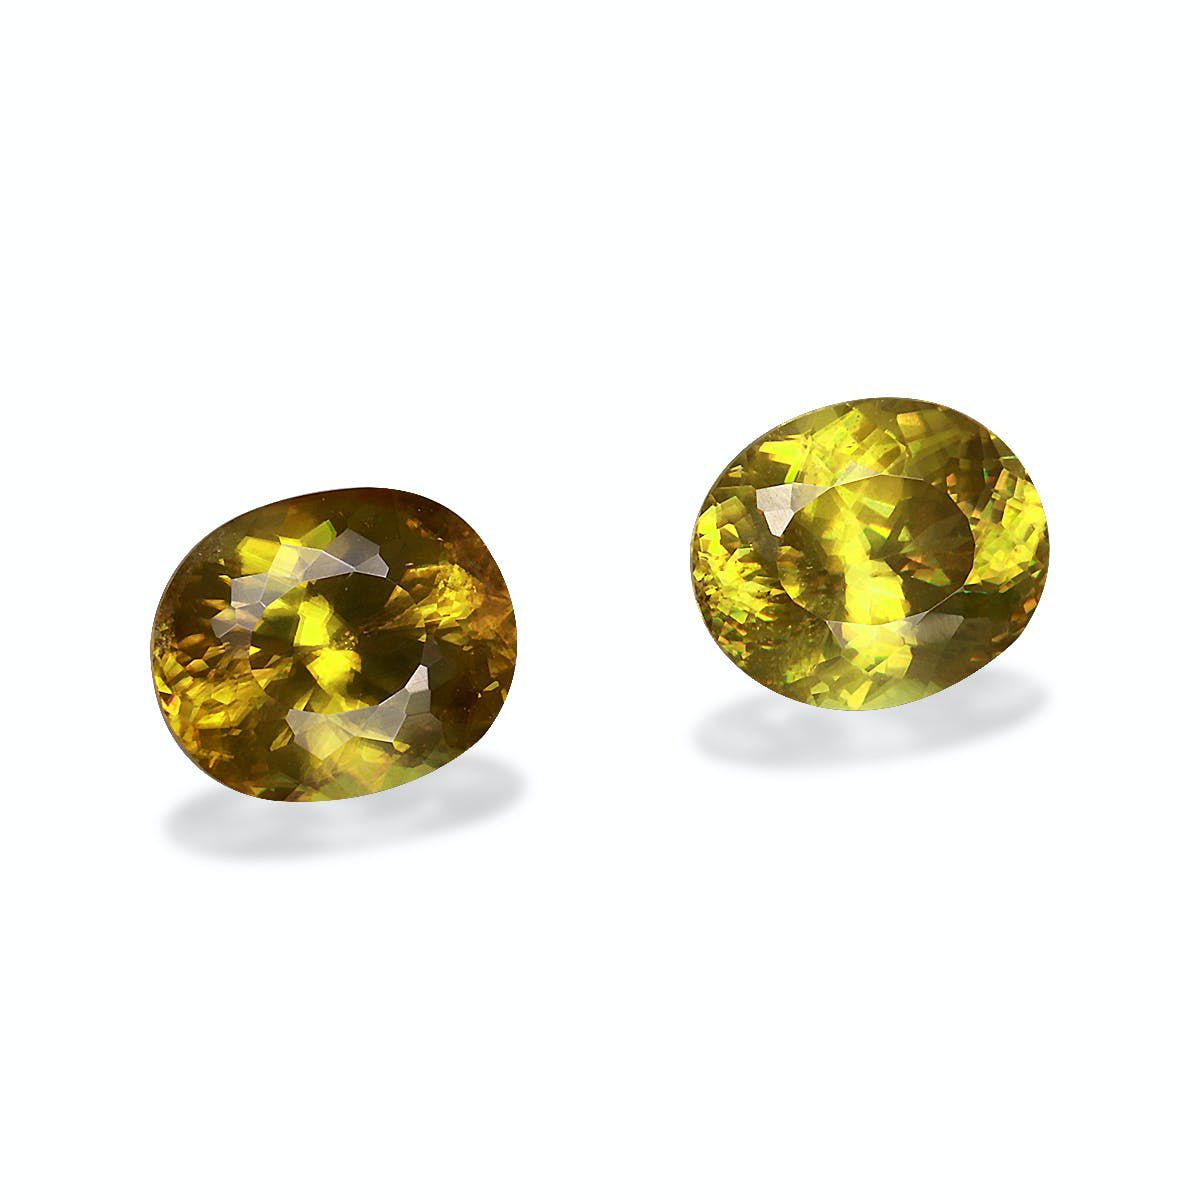 Picture of Lime Green Sphene 3.27ct - Pair (SH0694)